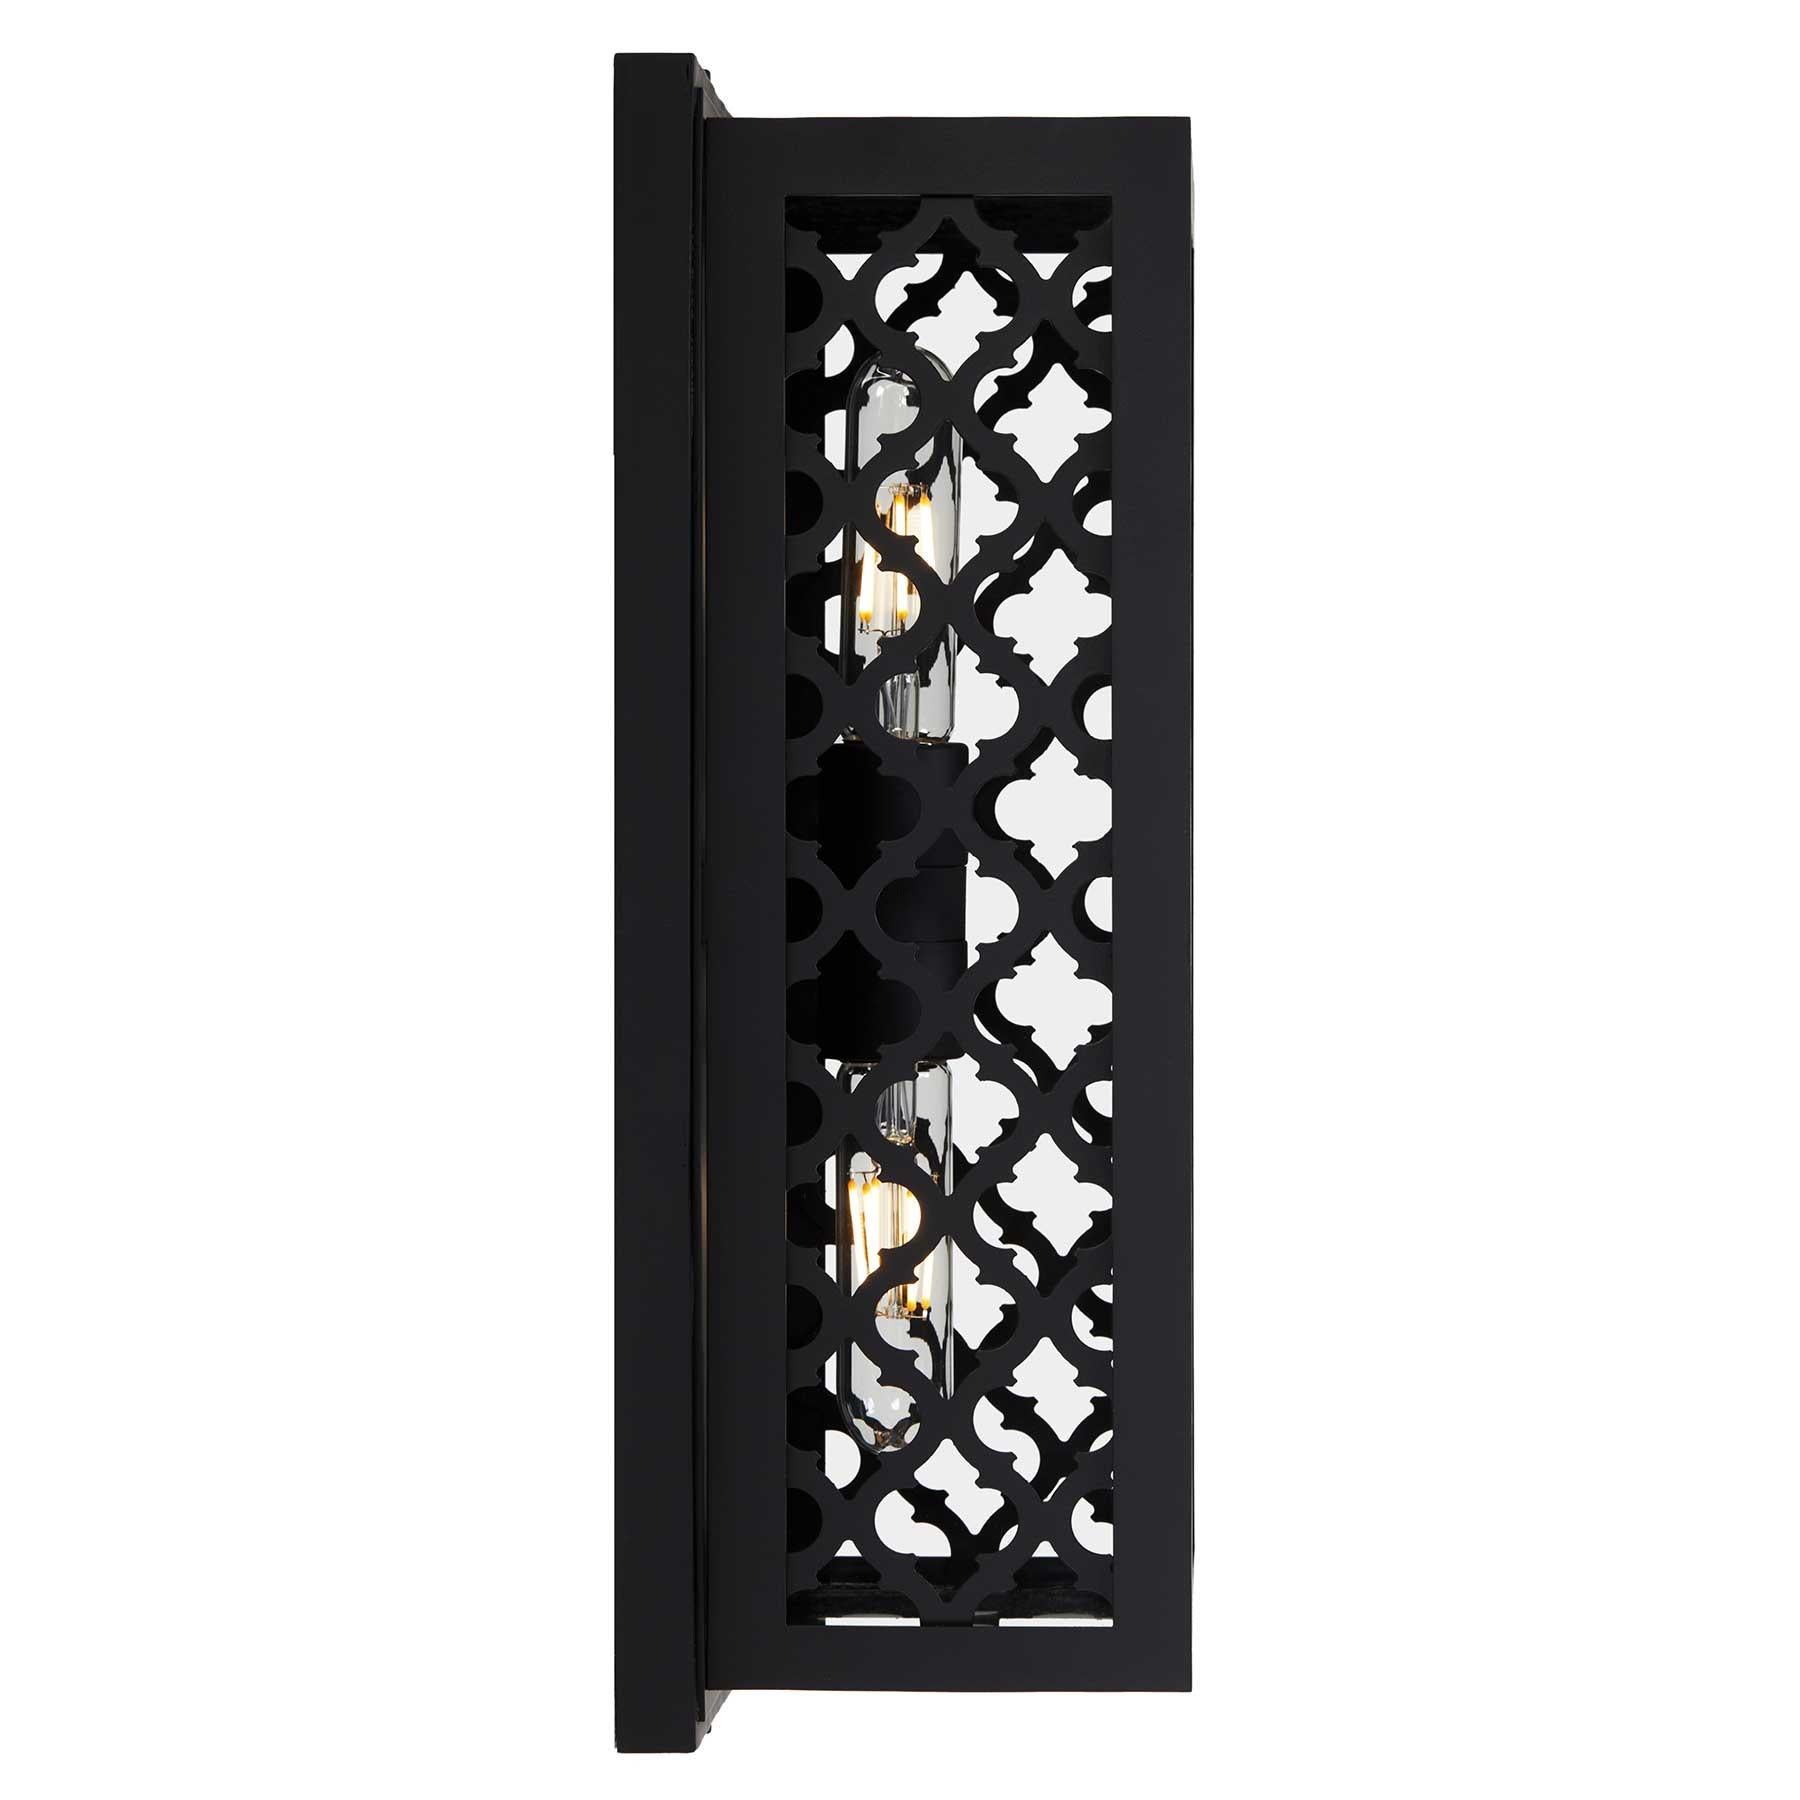 Hand-Painted Contemporary Modern Rectangular Exterior Wrought Iron Lantern w/ Decorative Grid For Sale